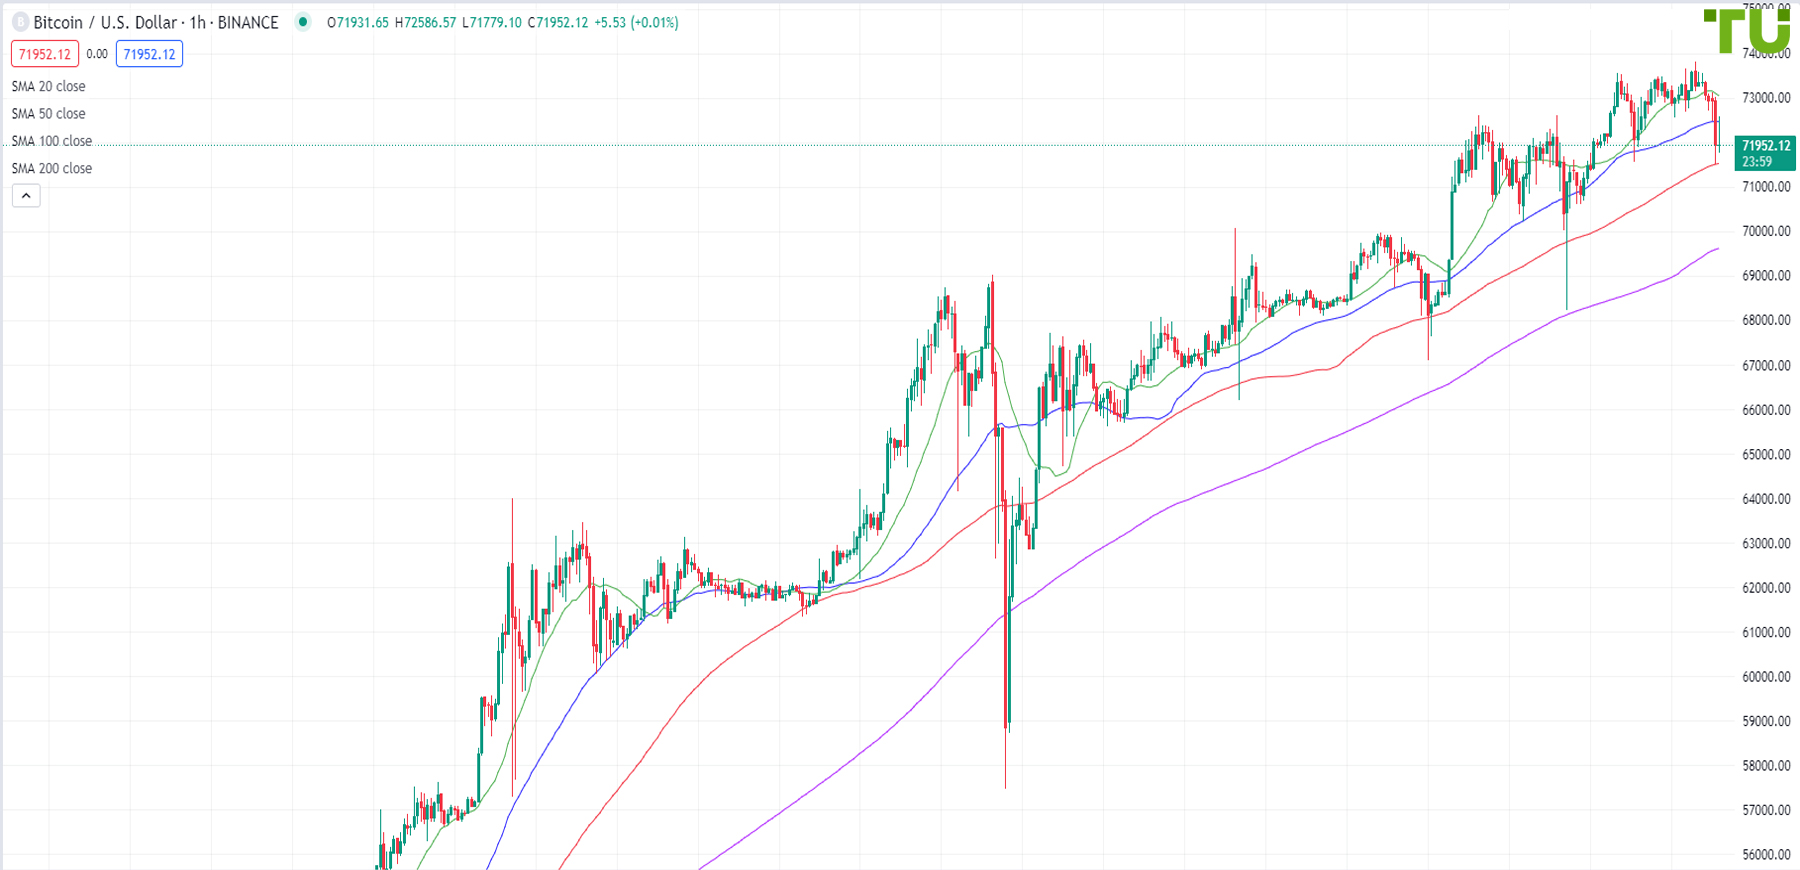 BTC/USD is declining after updating the highs